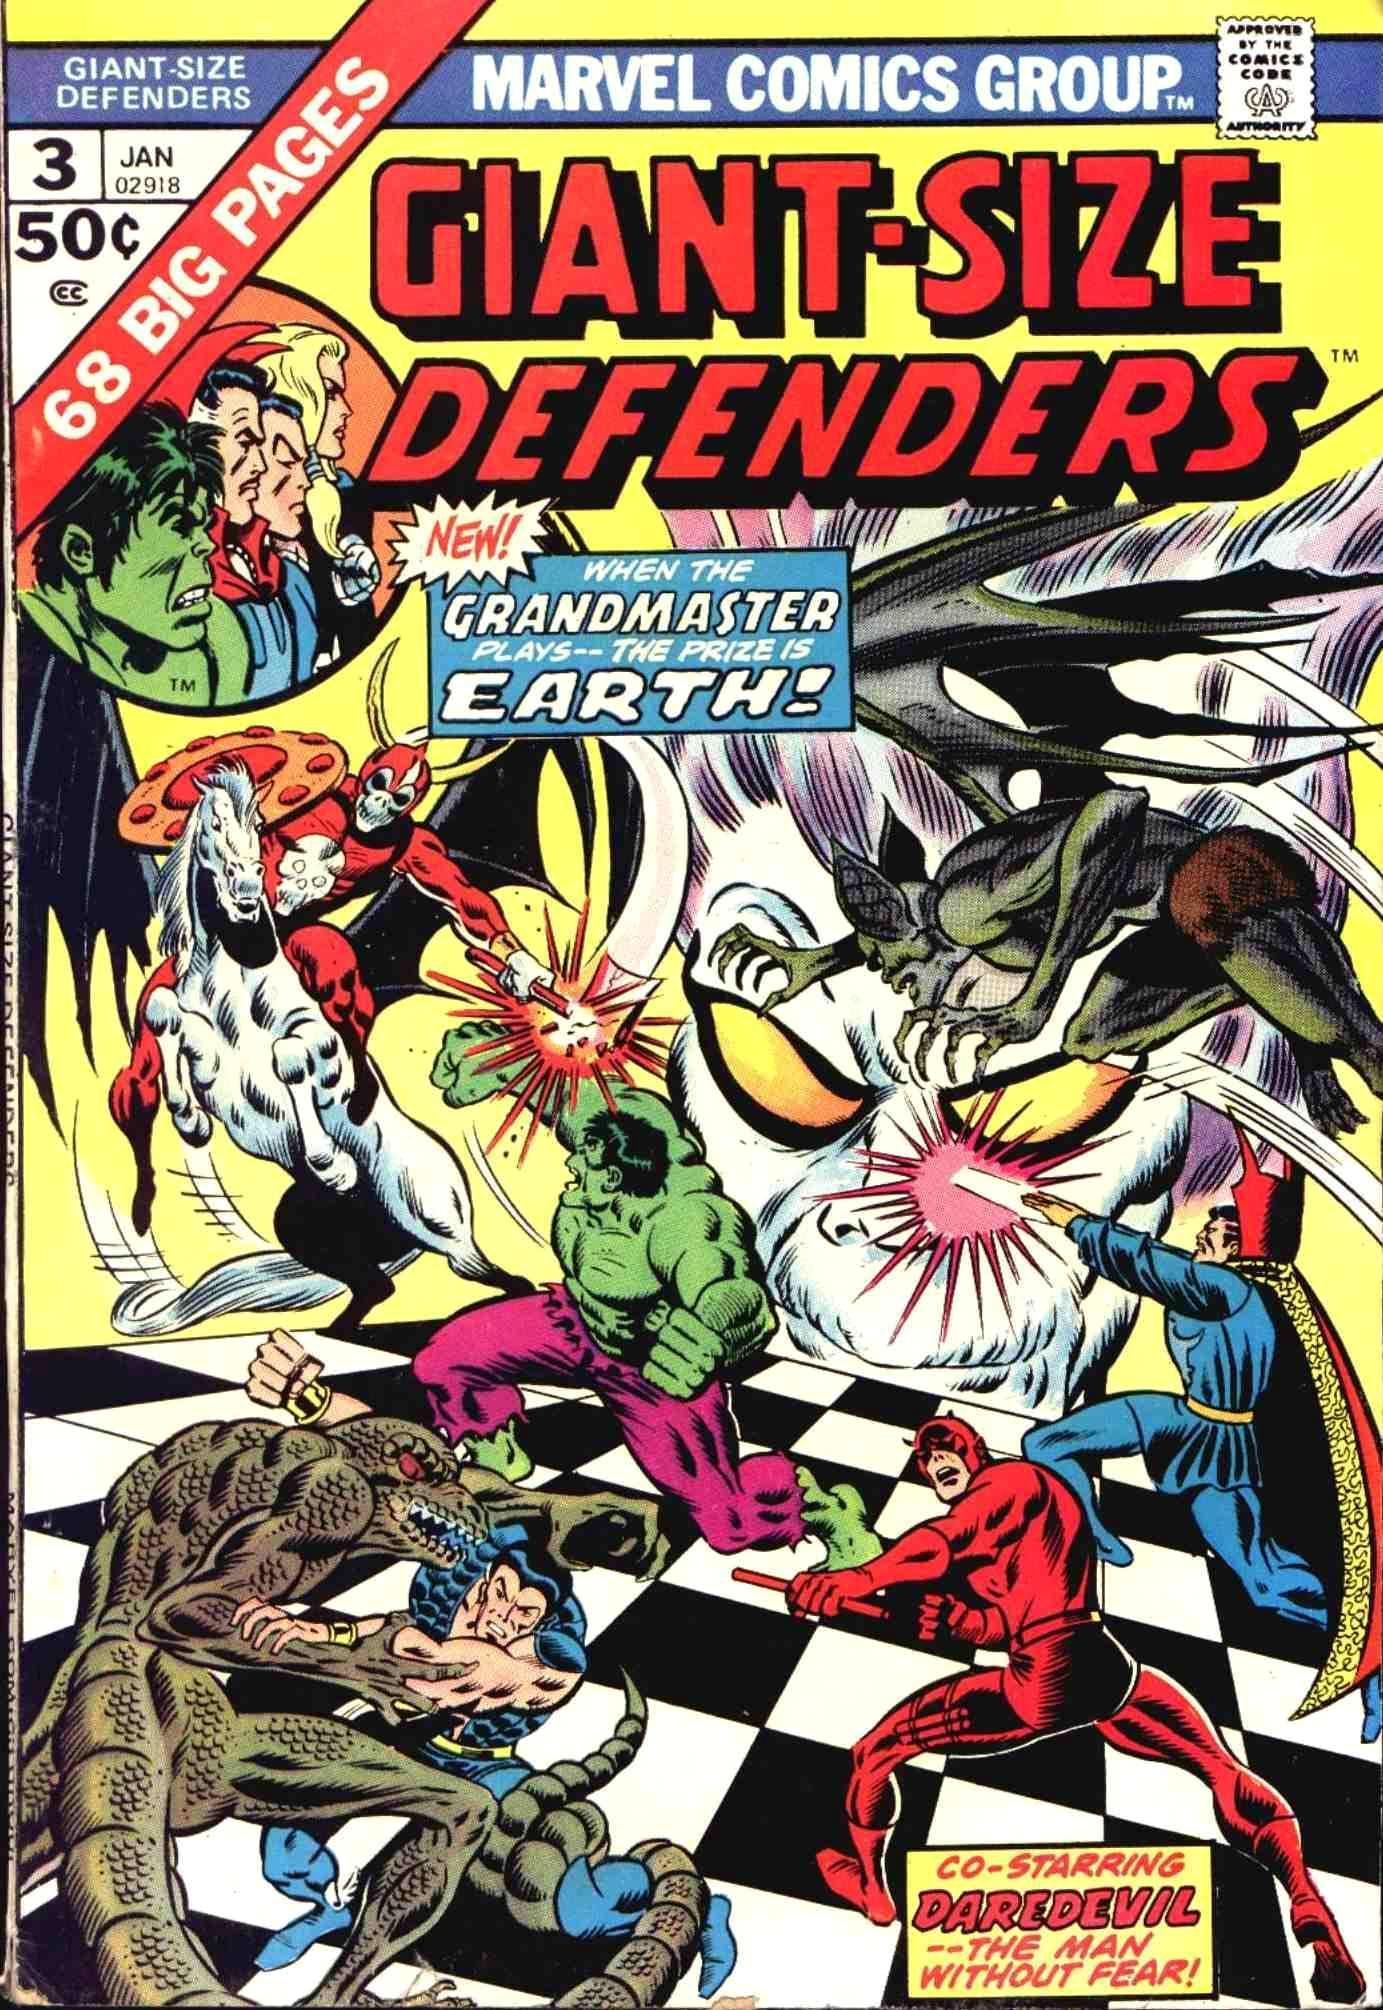 Giant-Size Defenders Vol. 1 #3